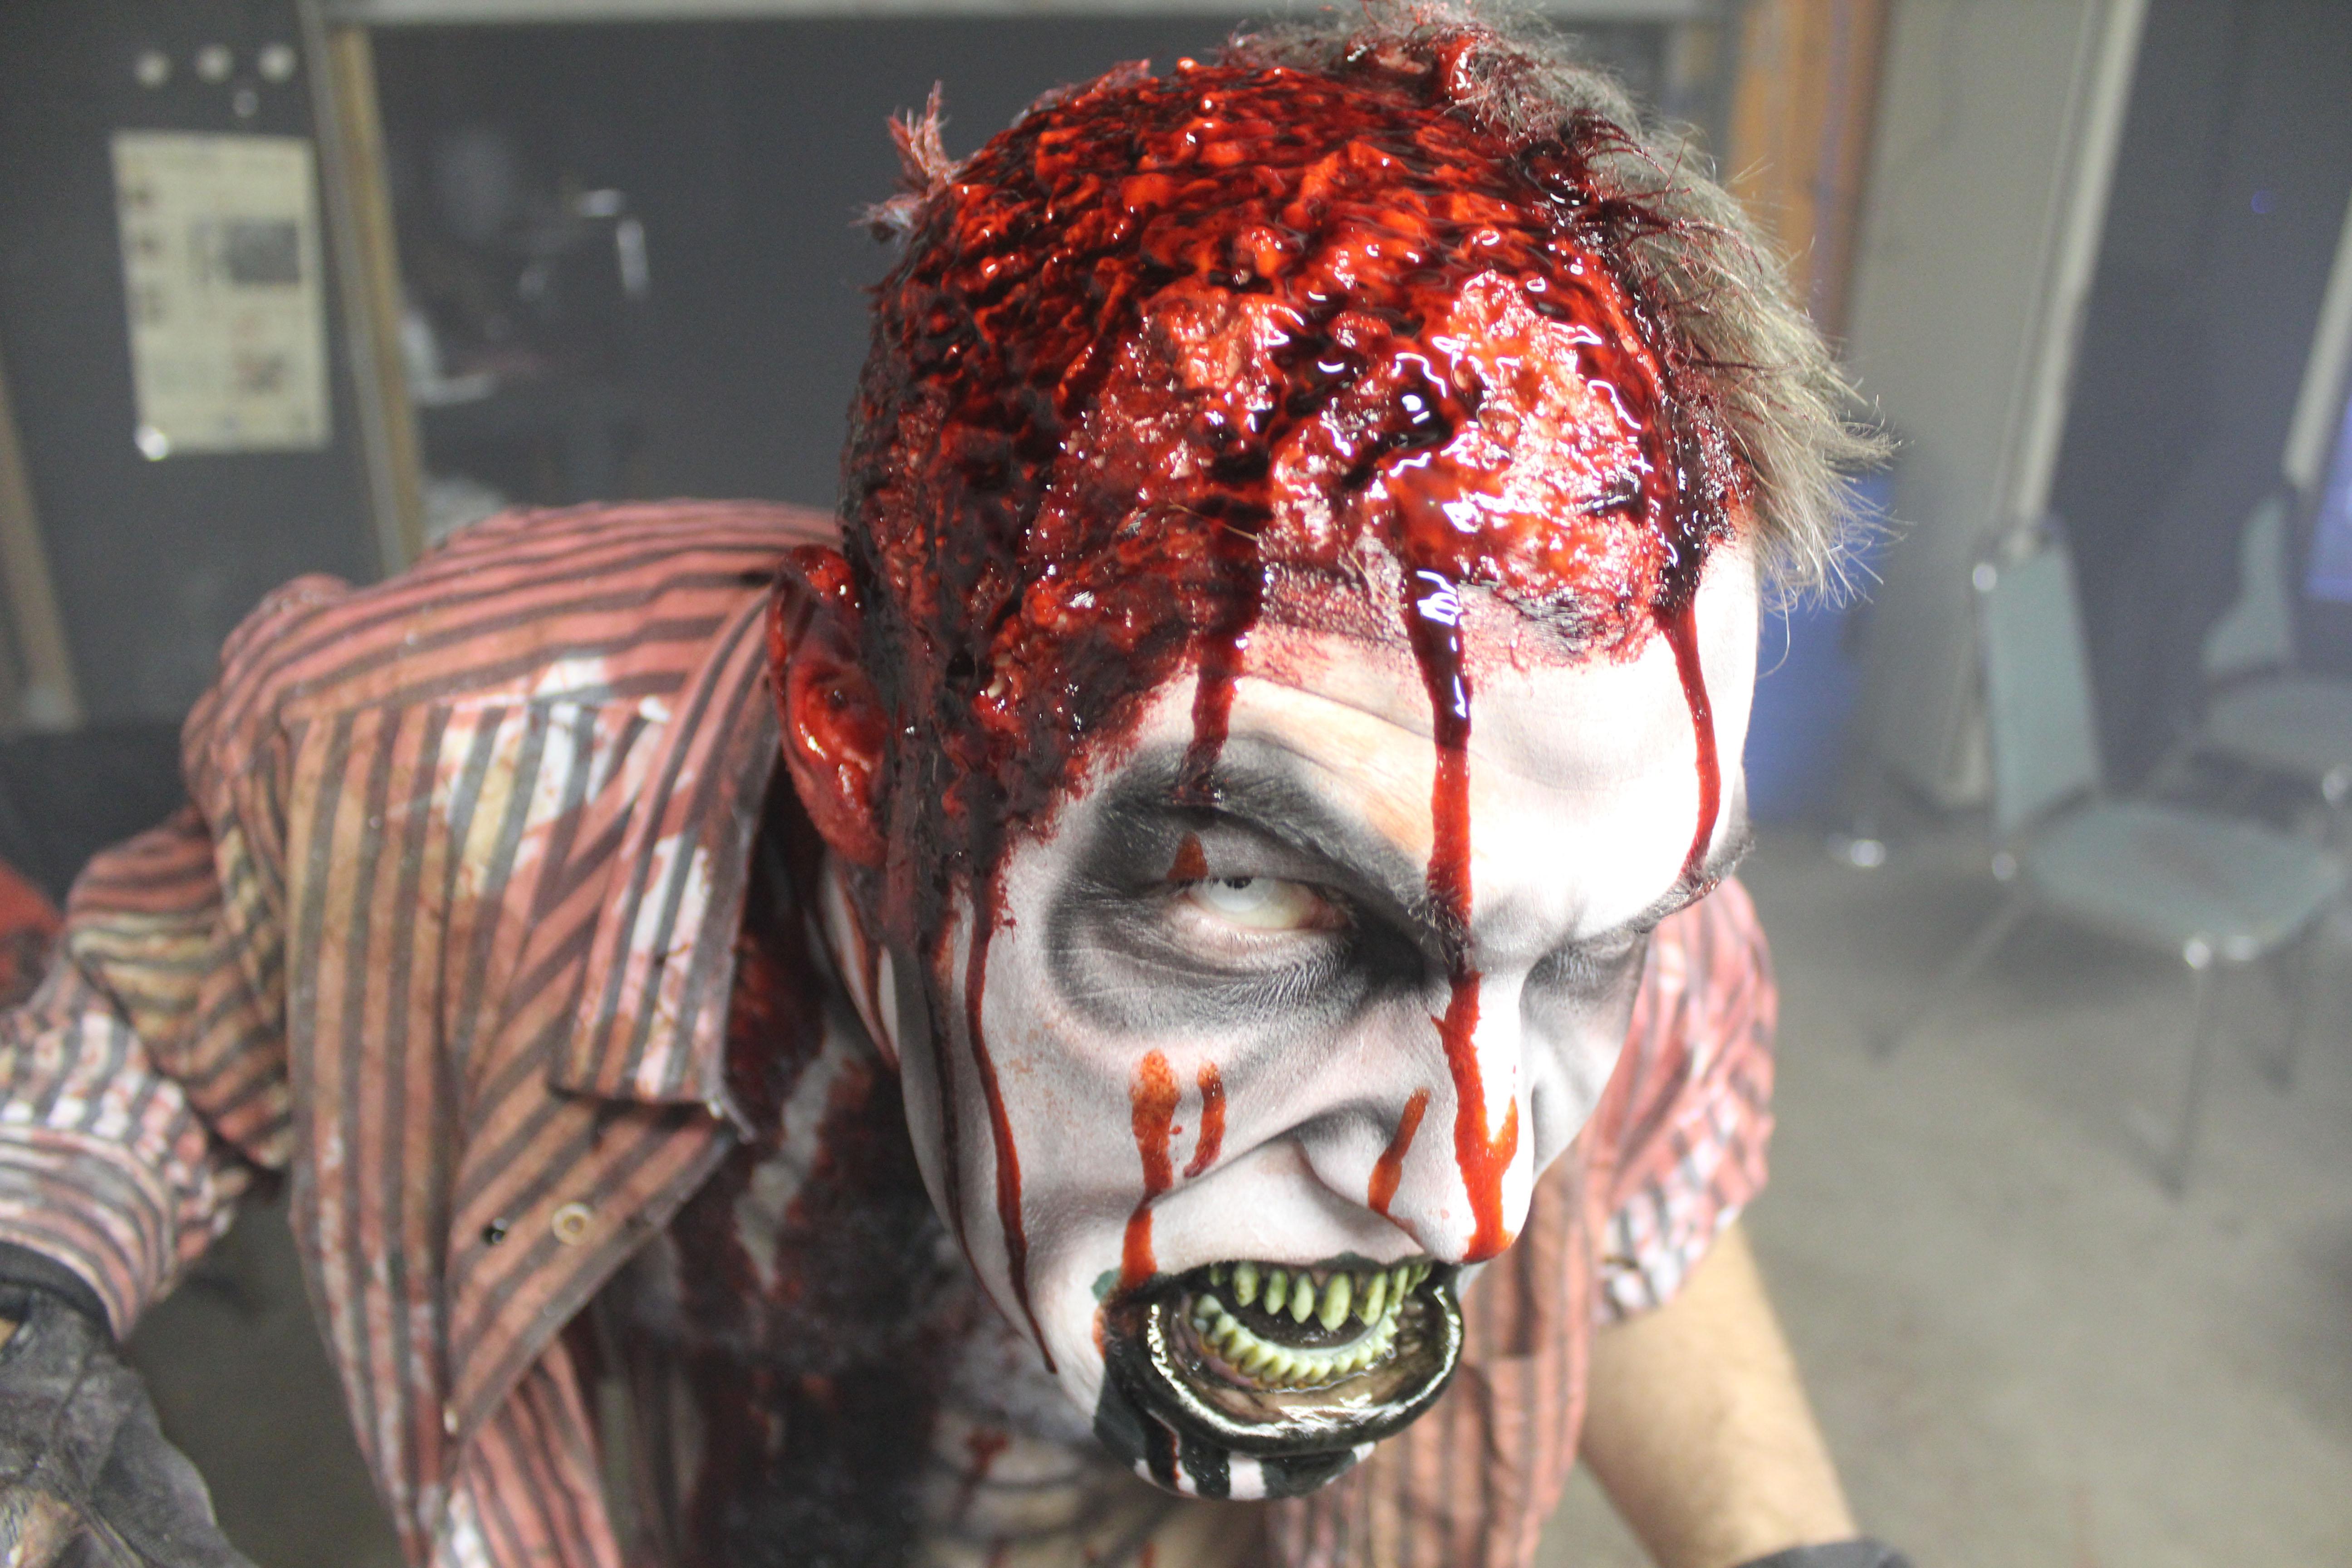 Scare tactics: Realm of Terror features makeup effects by Stevie Calabrese of “Face Off” Season 9. 